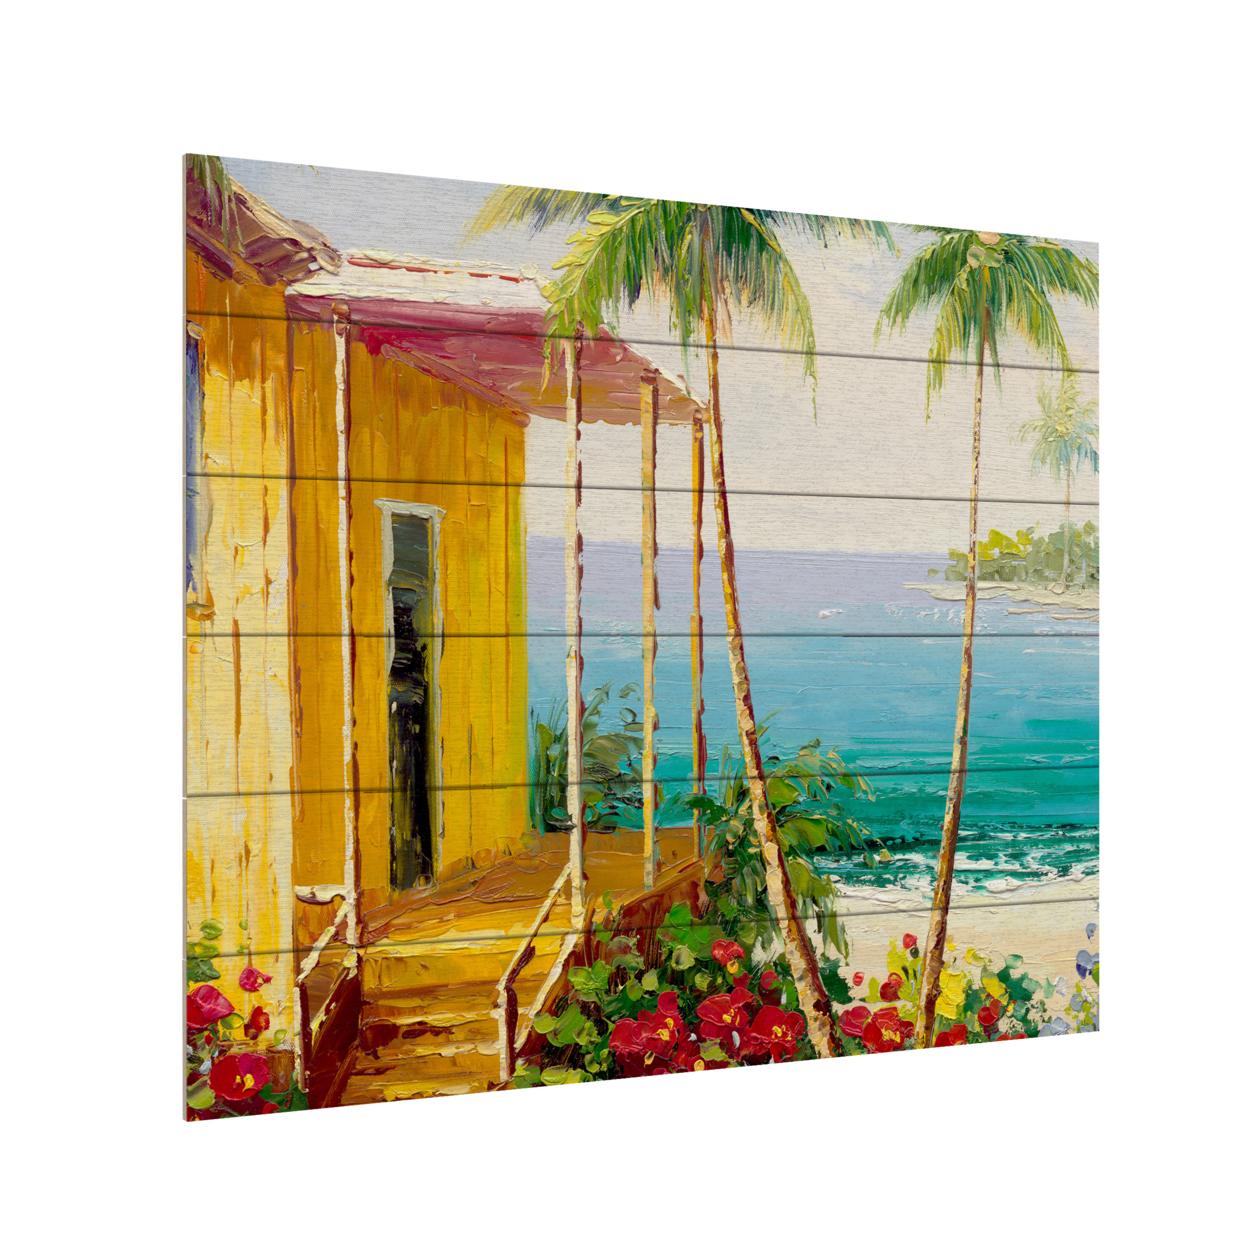 Wooden Slat Art 18 X 22 Inches Titled Key West Villa Ready To Hang Home Decor Picture